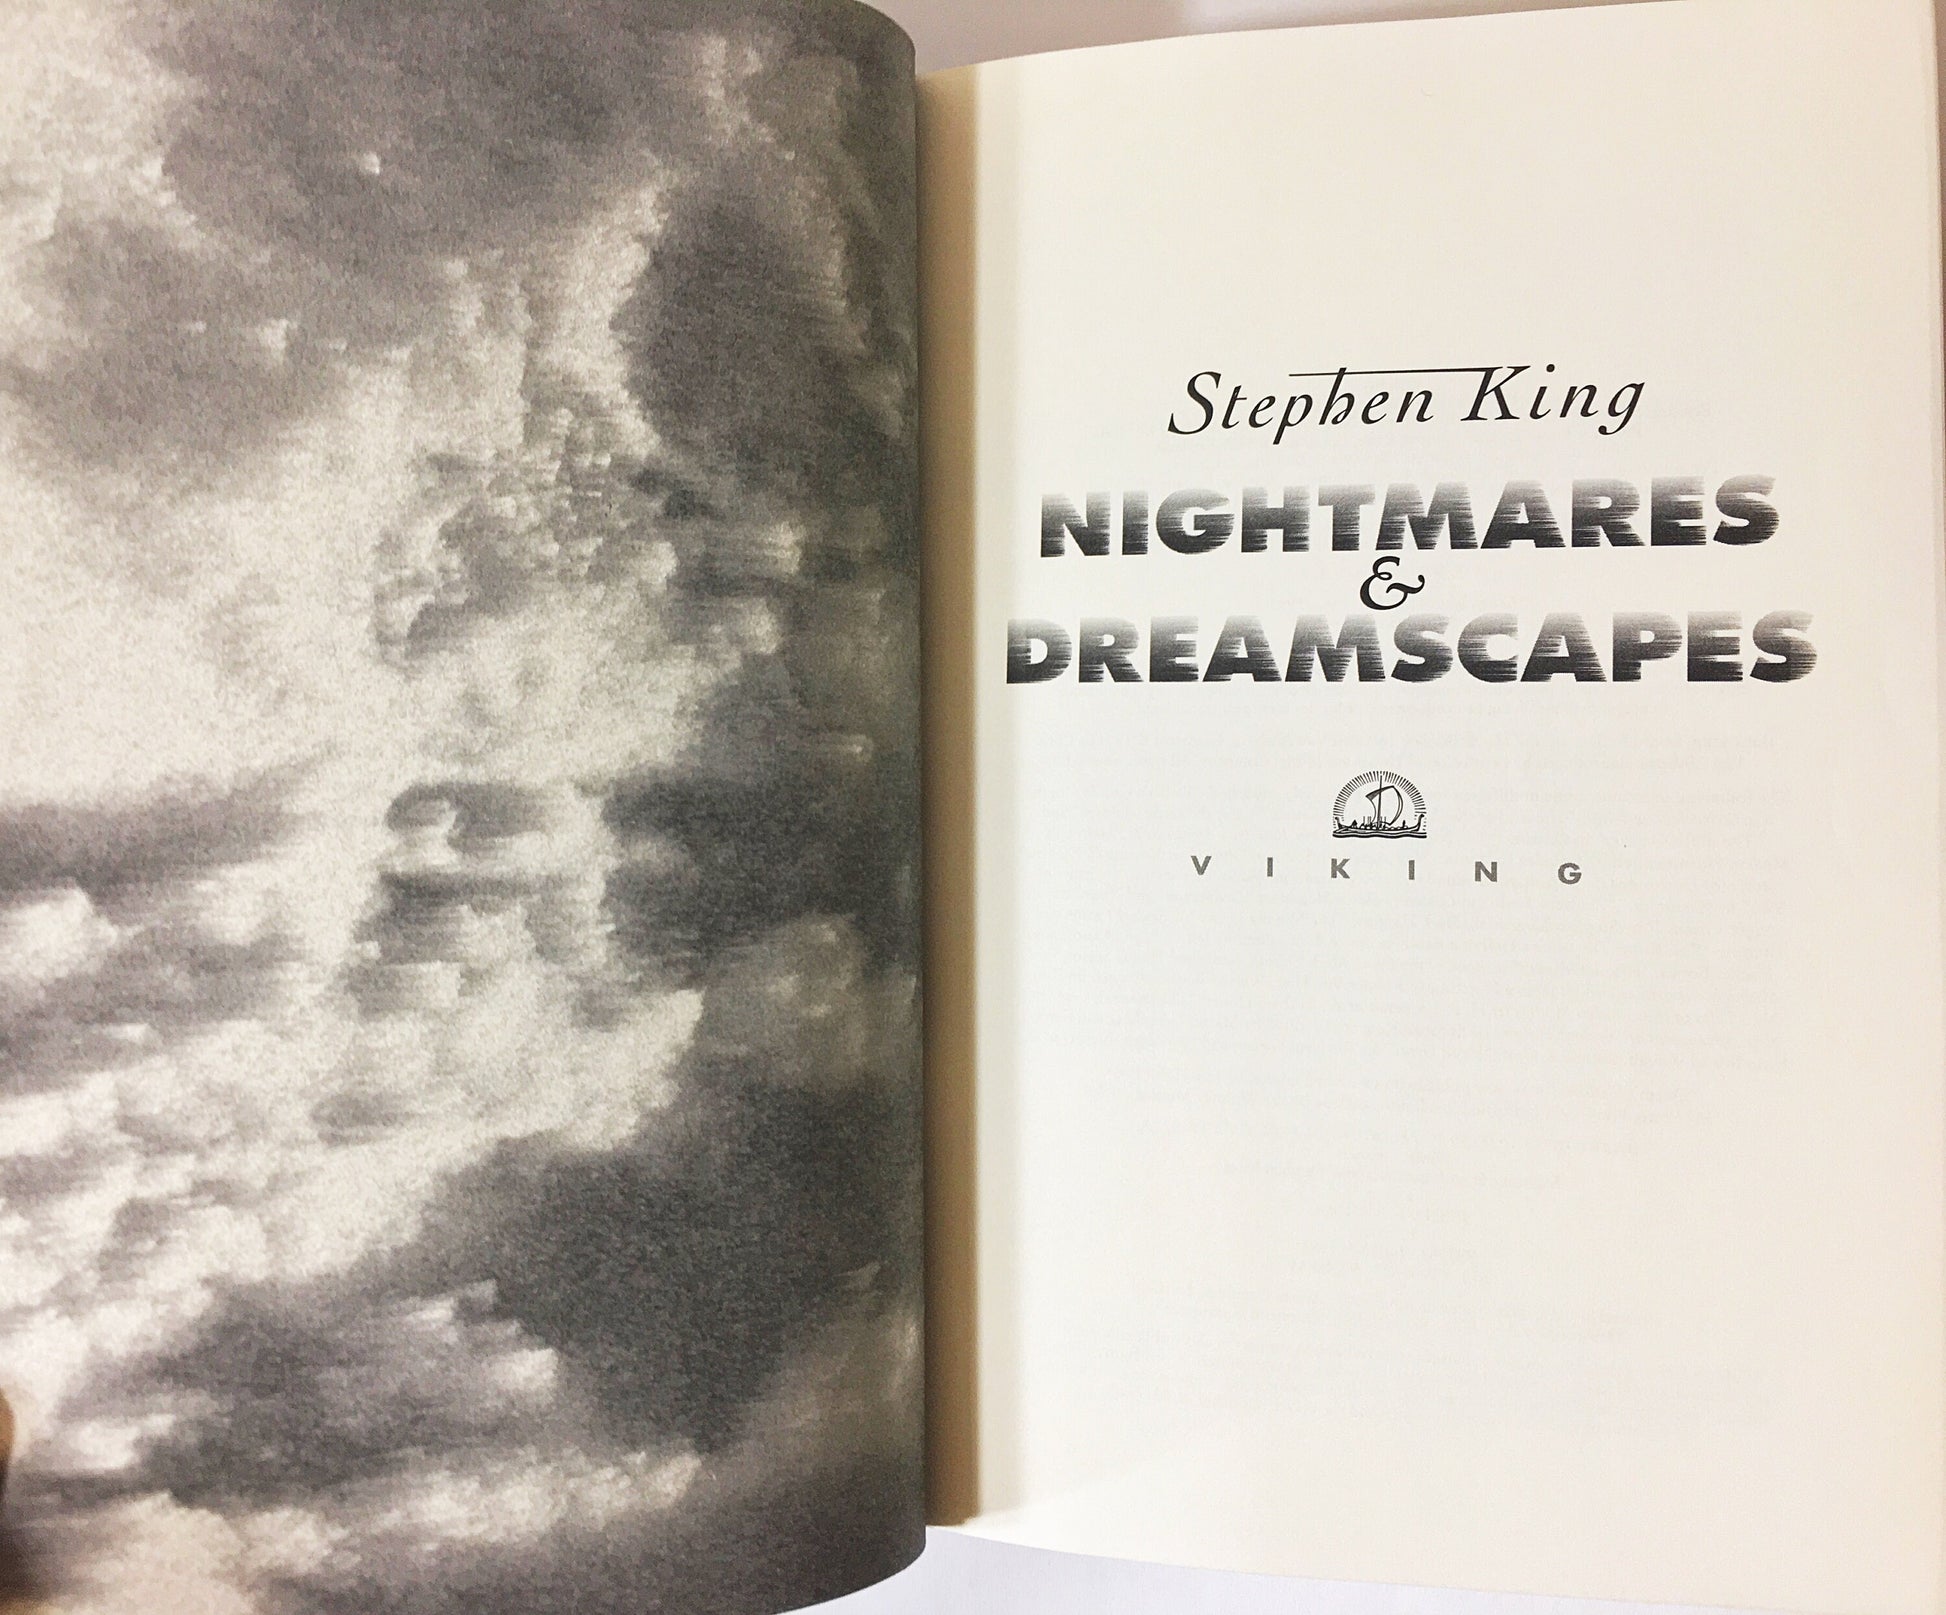 Nightmares & Dreamscapes by Steven King. FIRST EDITION vintage book circa 1993. Short story collection. Maintains all first edition points.